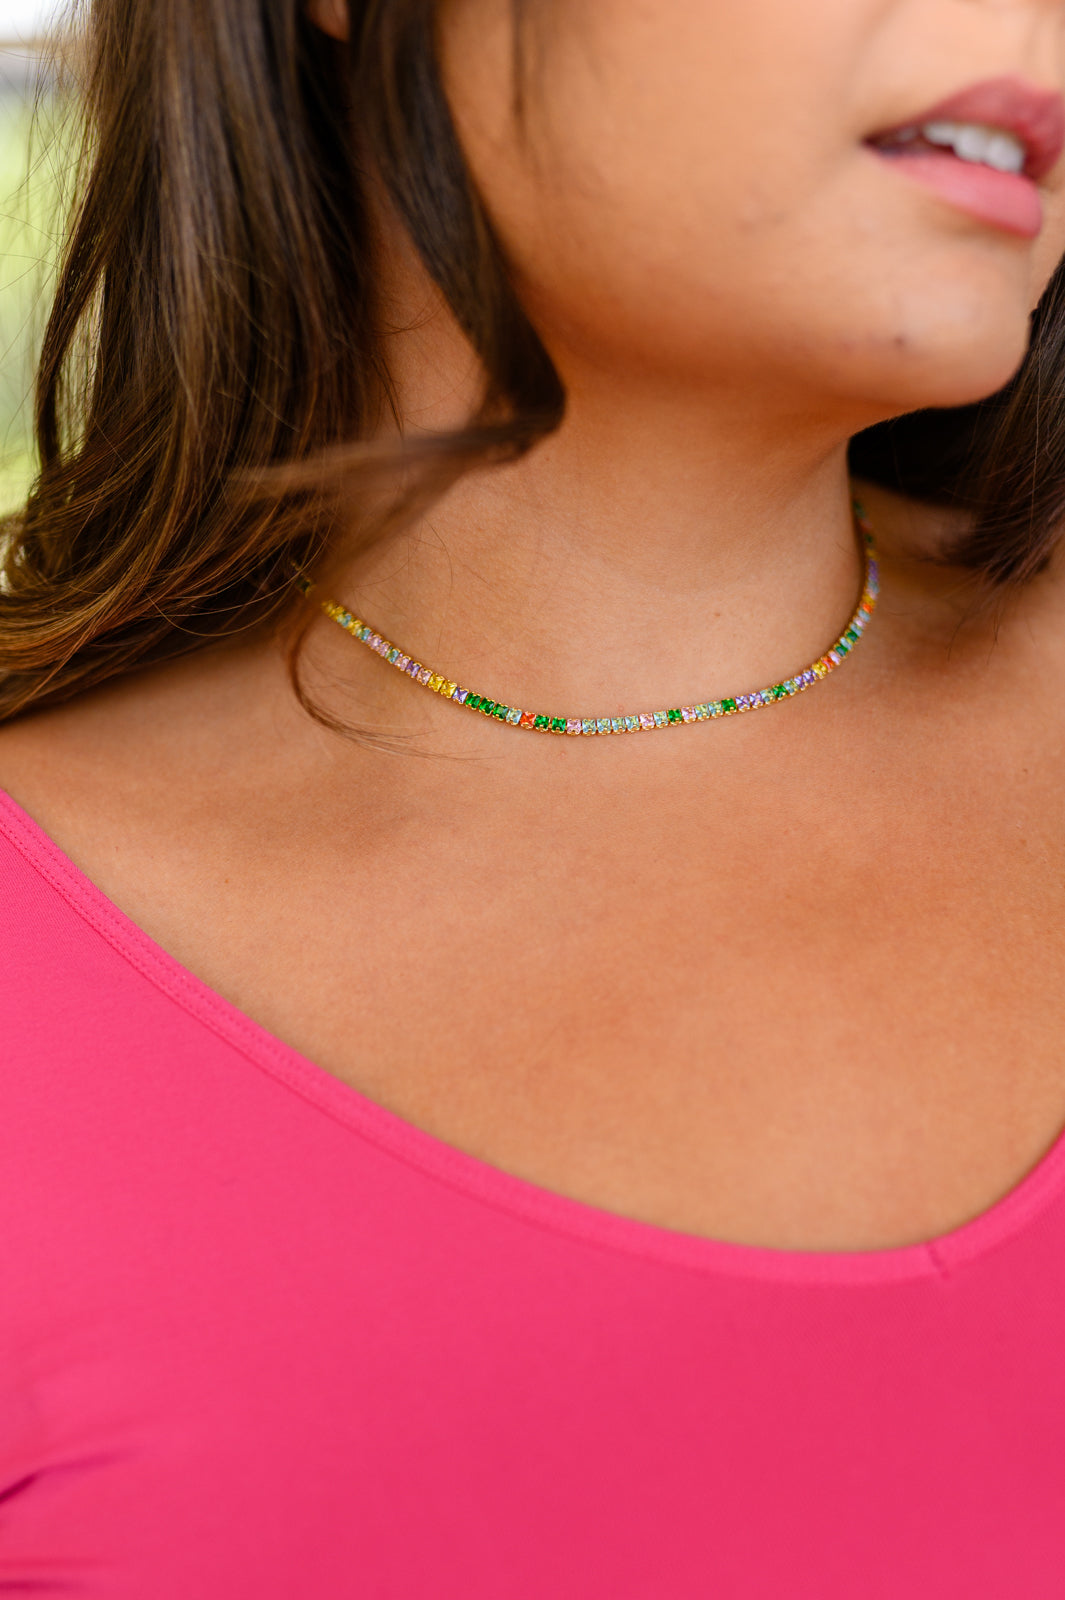 Make a statement with The Promise Tennis Necklace. This exquisite, timeless design is made with 18K gold and multicolored Cubic Zirconia stones for a truly dazzling look. Make a commitment to your style with The Promise Tennis Necklace - do you promise?  18K gold plated titanium steel means you can wear this piece to the beach, the pool, or even working out without worrying over tarnishing, green marks, or skin irritation.